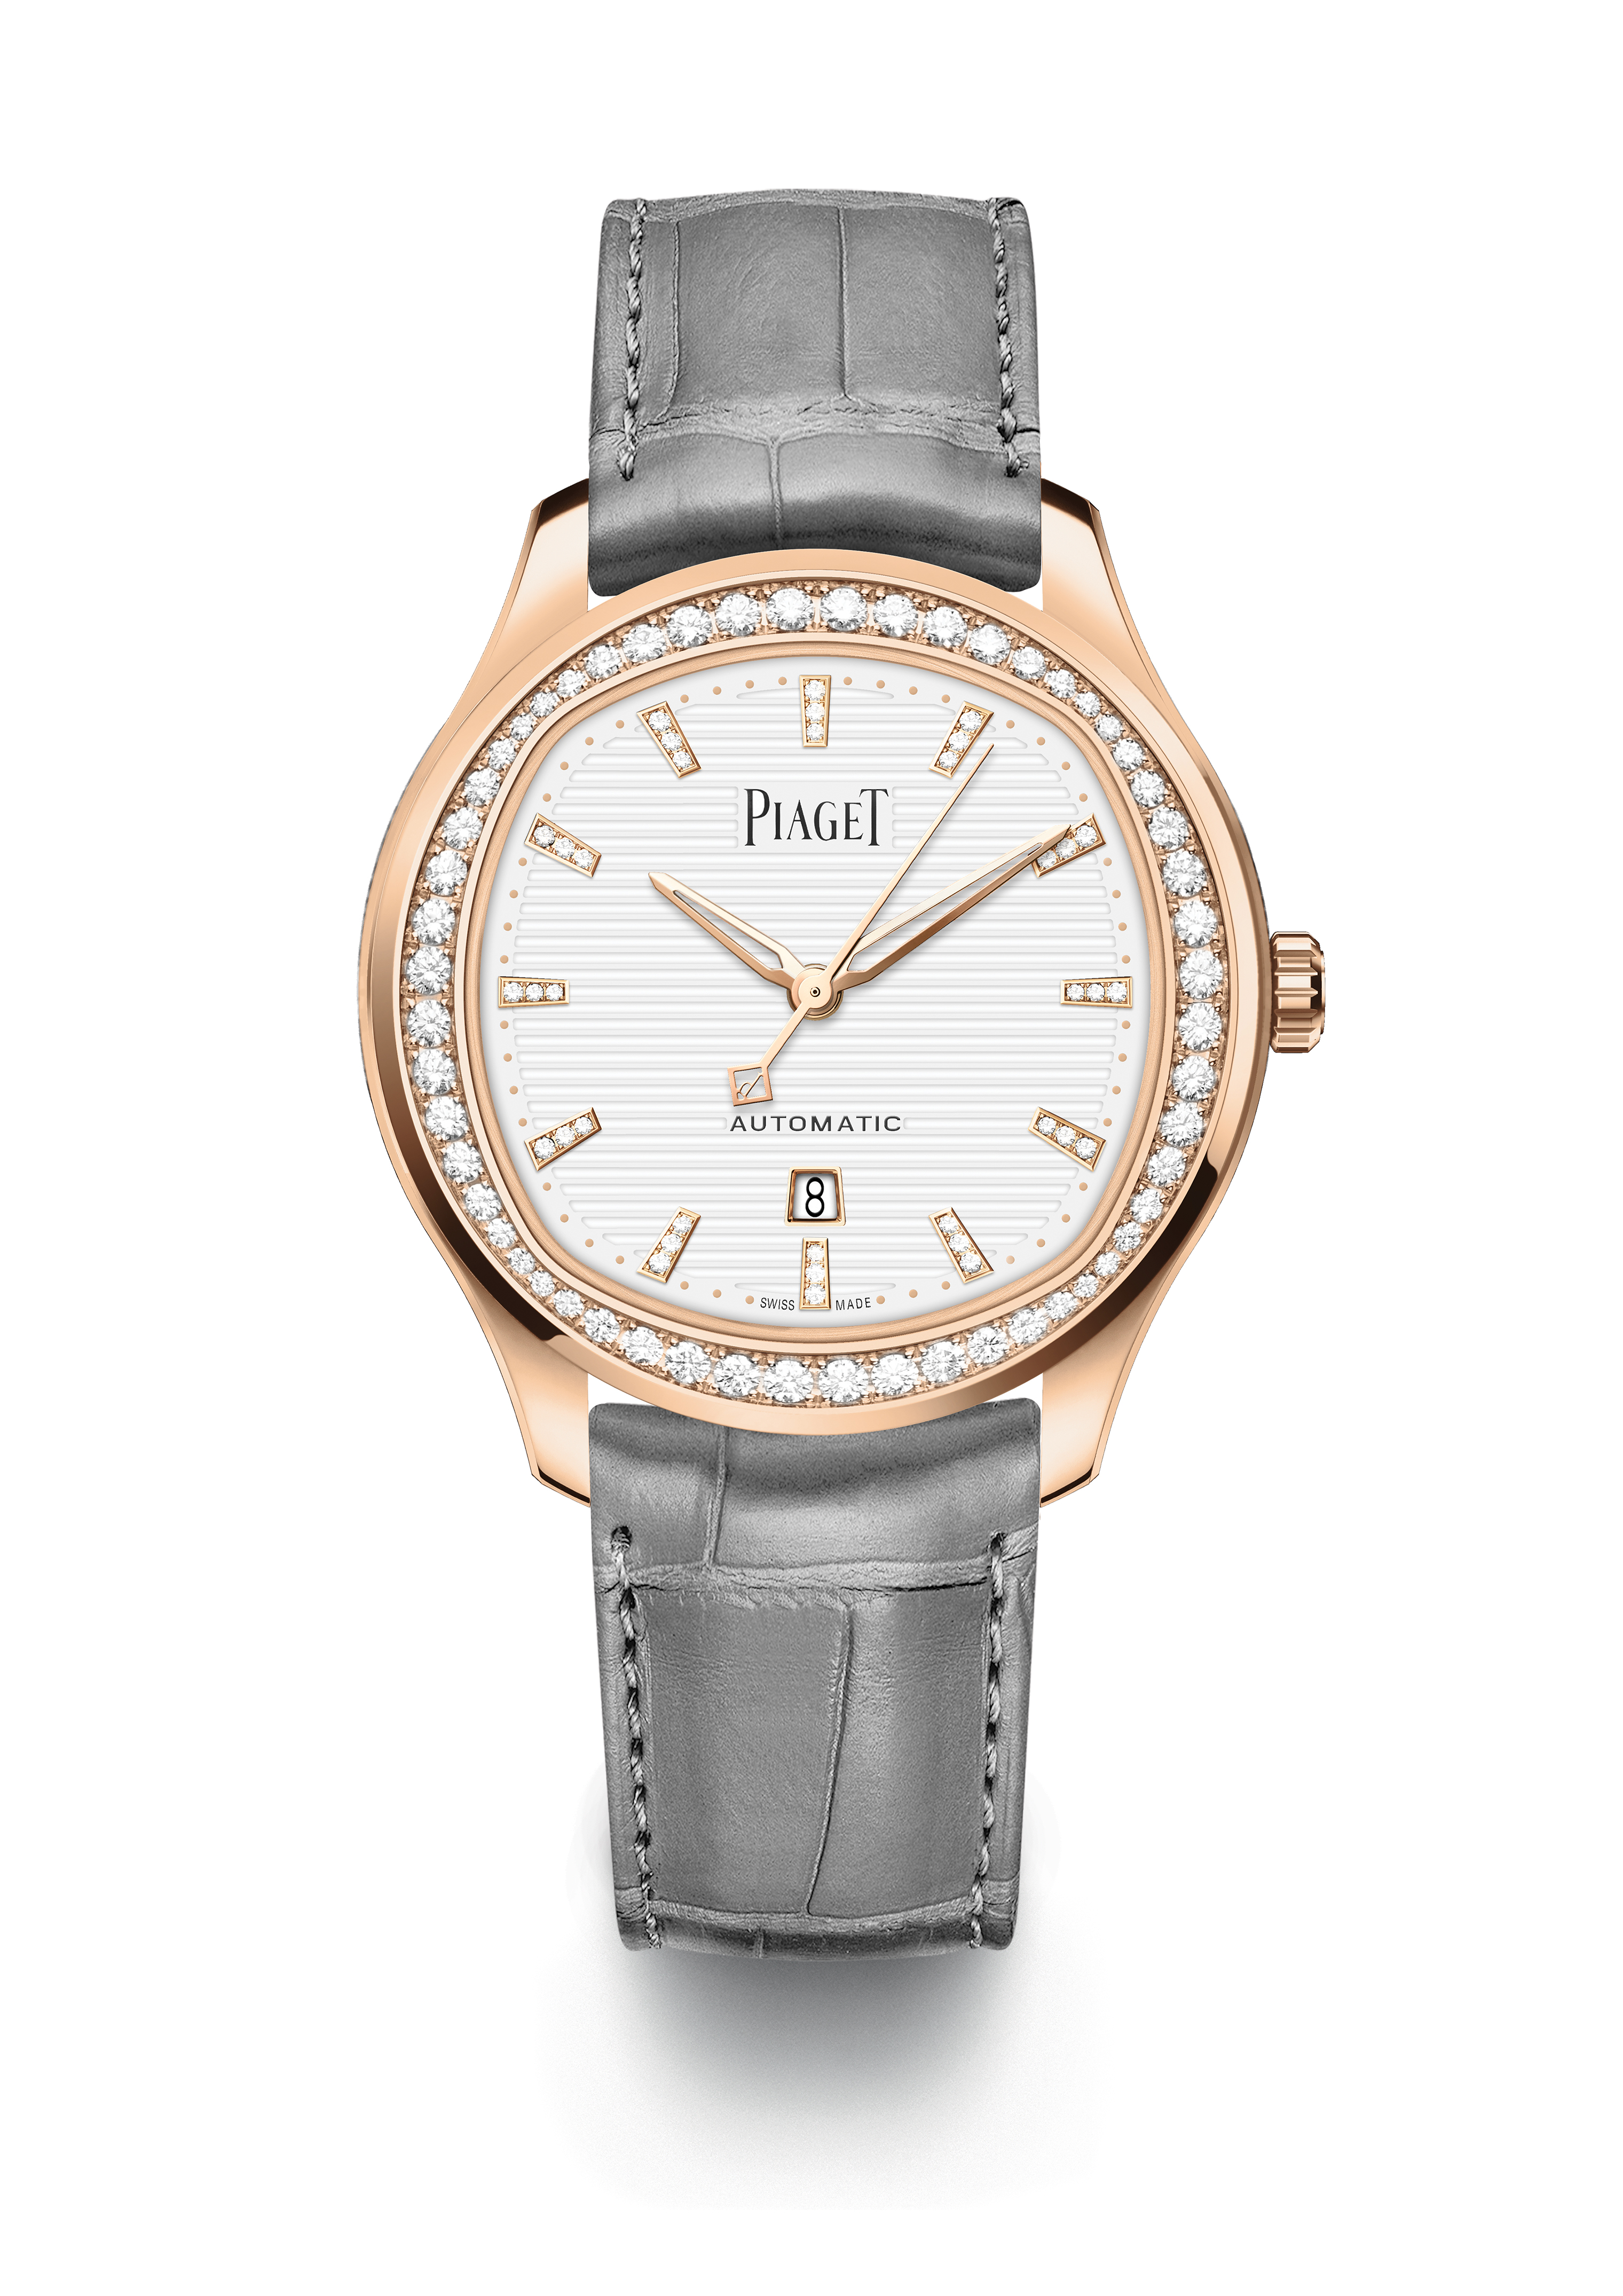 Piaget Welcomes The New Piaget Polo Date In 36mm